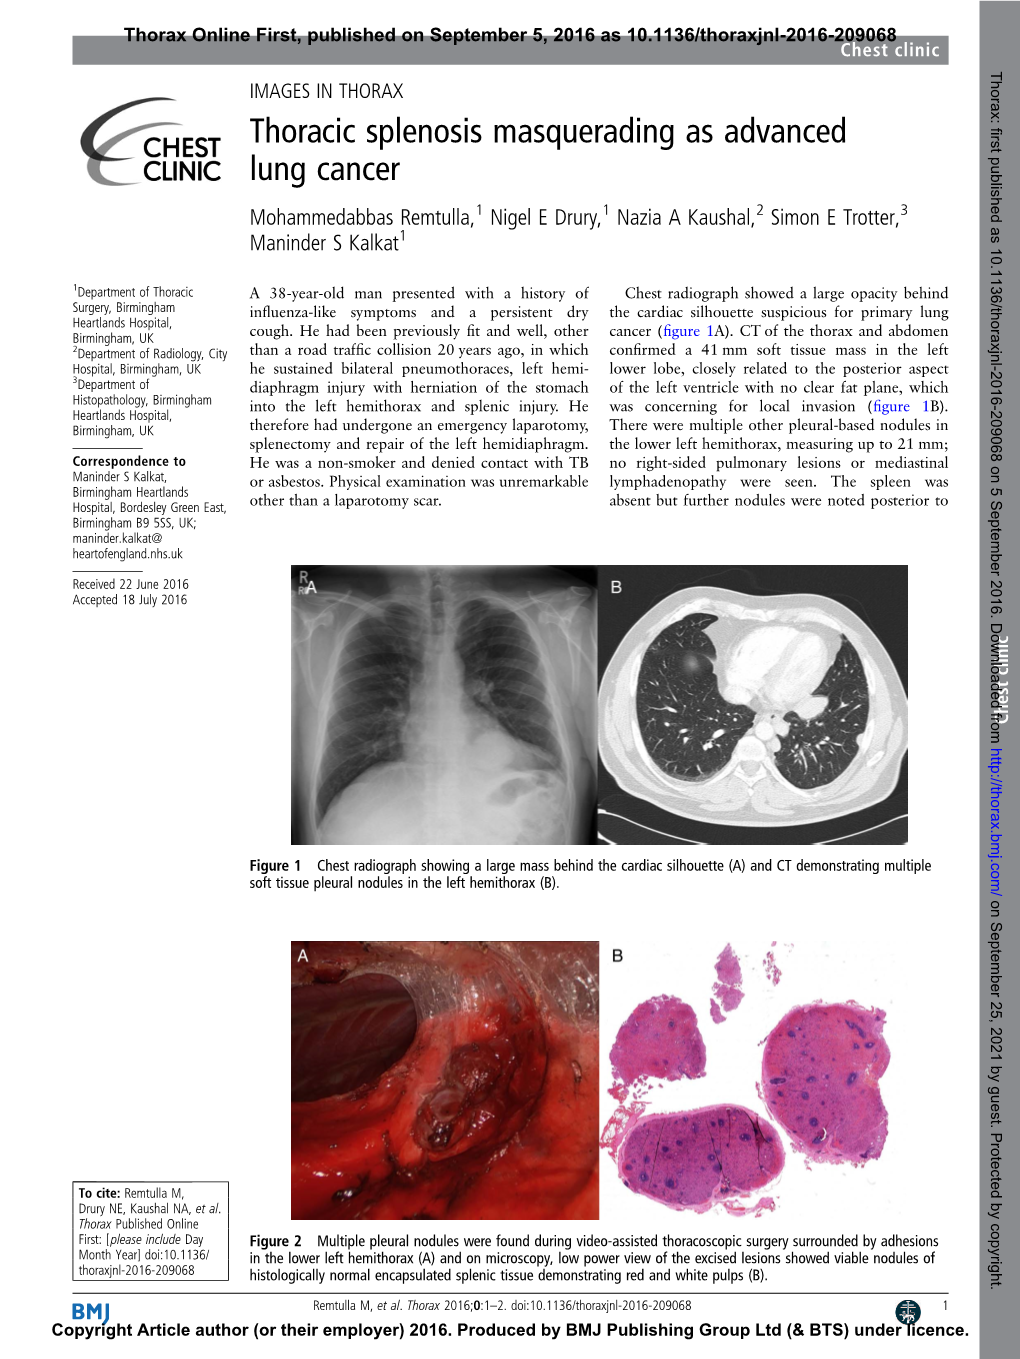 Thoracic Splenosis Masquerading As Advanced Lung Cancer